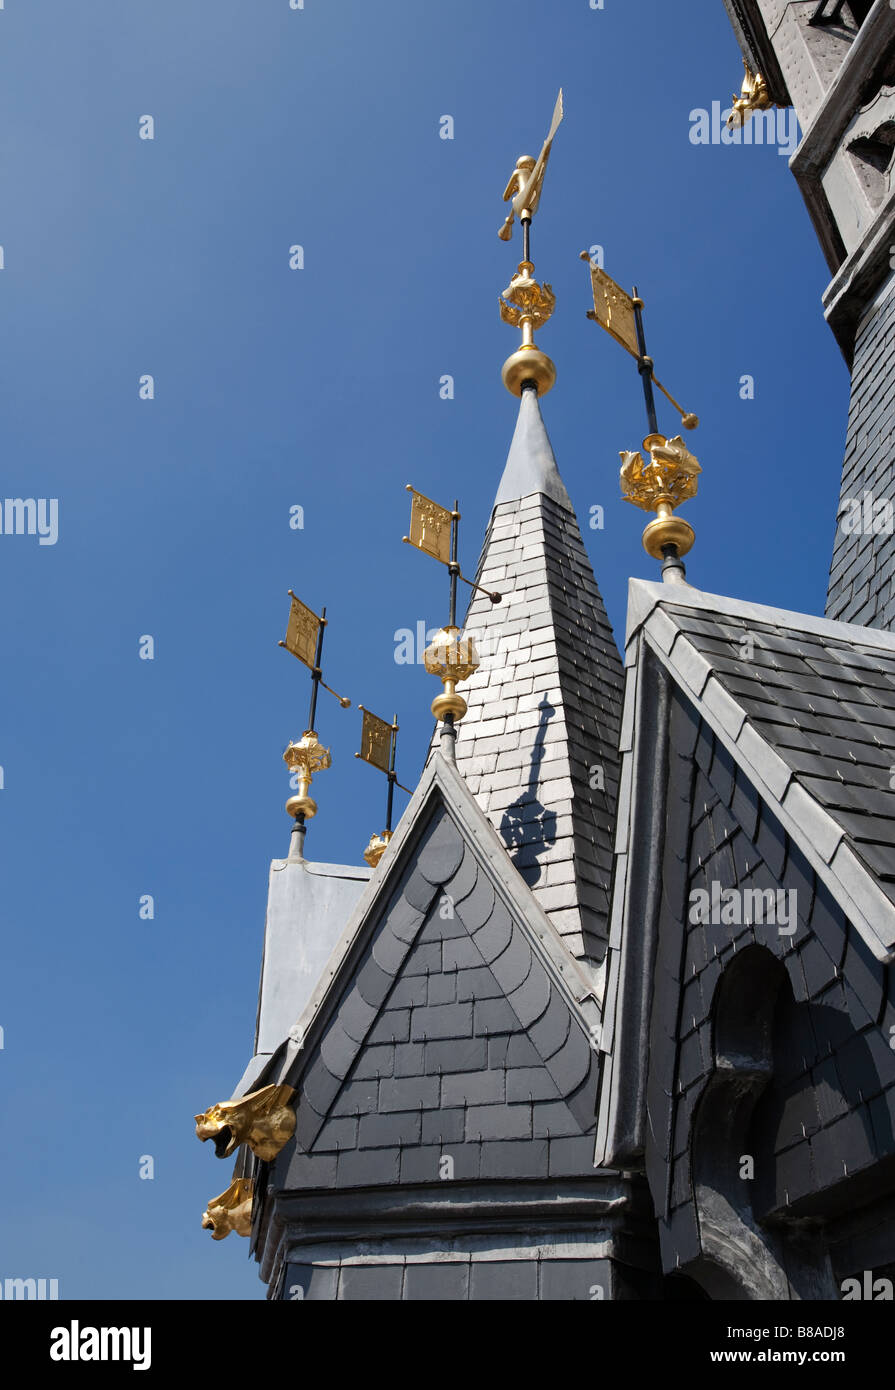 Gold painted metal flag weathervanes and gargoyles on roof of the Belfry tower Tournai Belgium Stock Photo